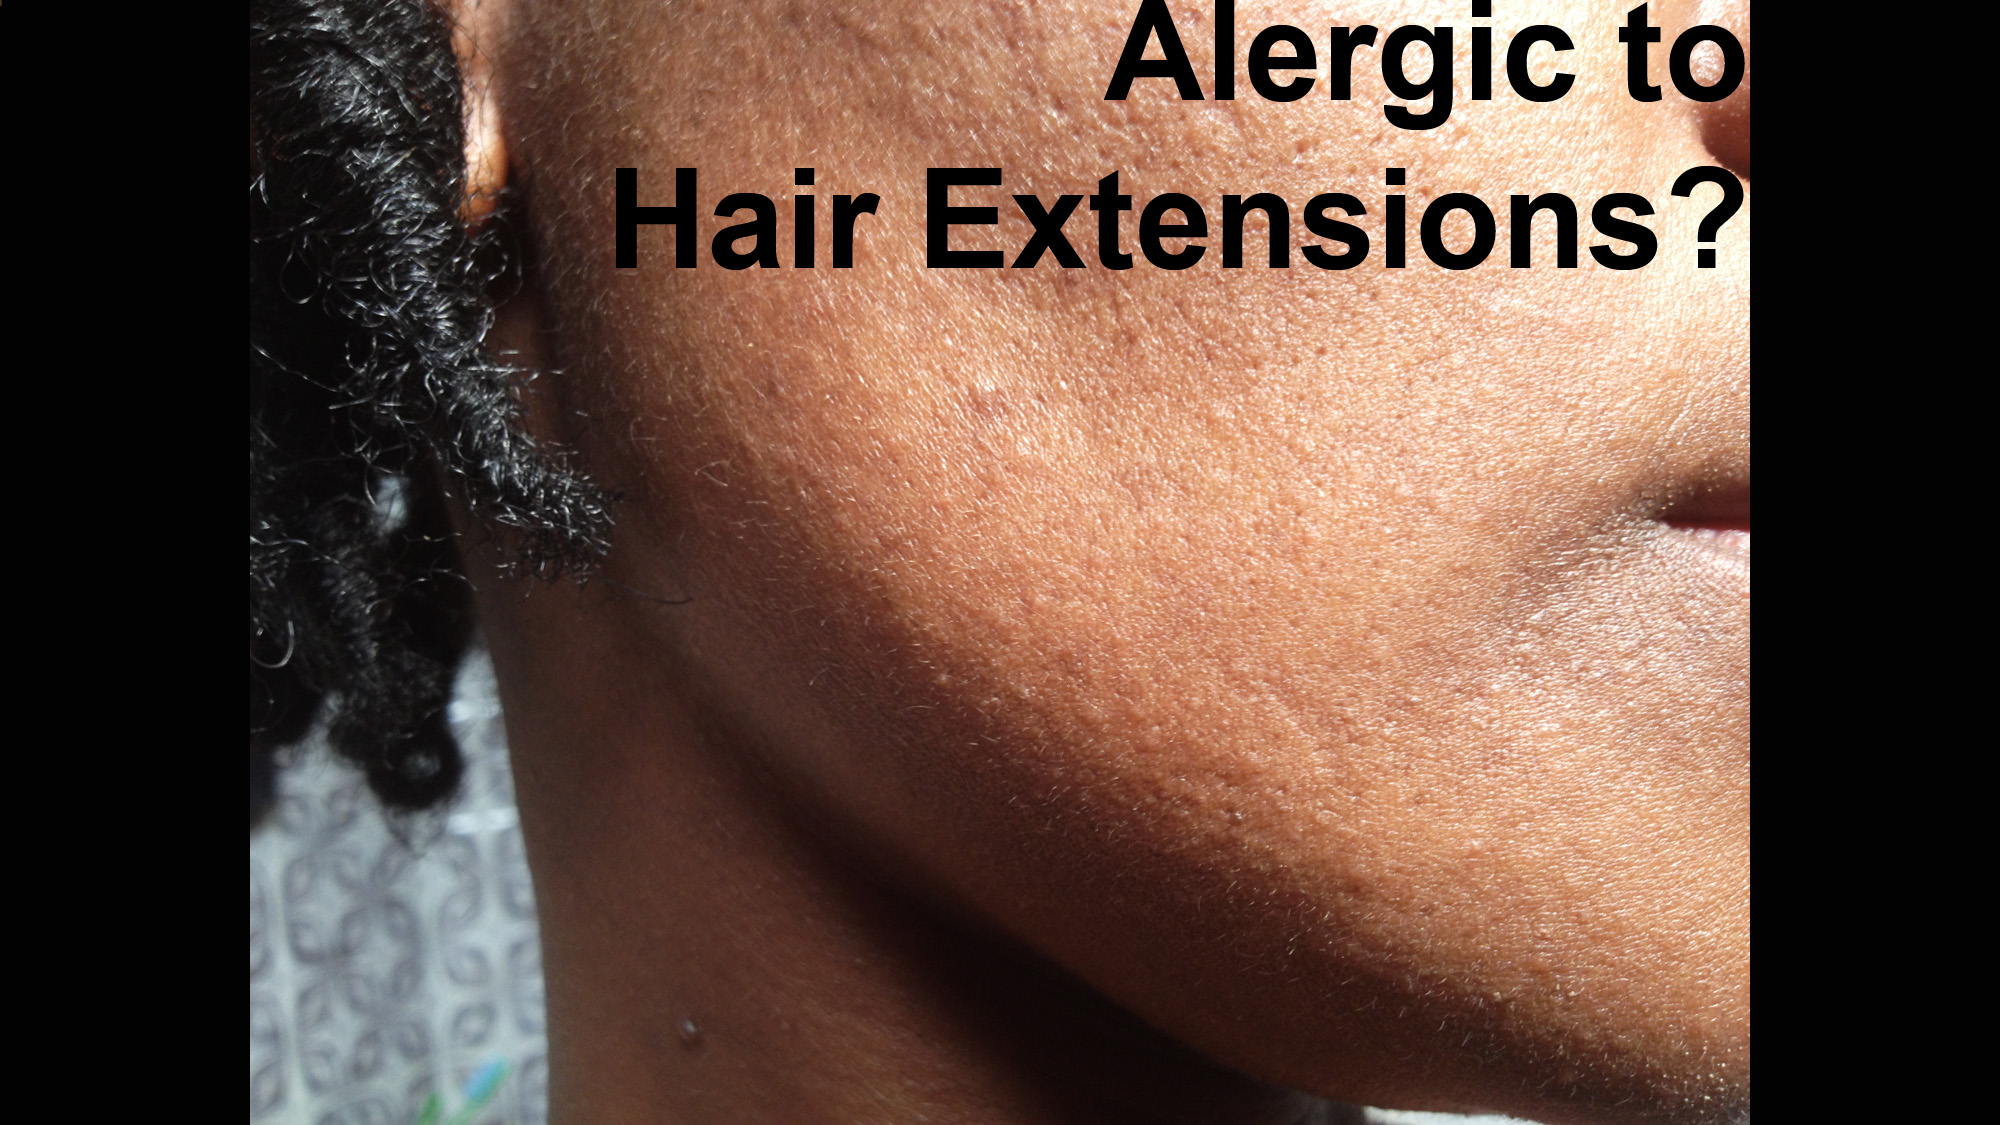 Allergic to Hair Extensions?